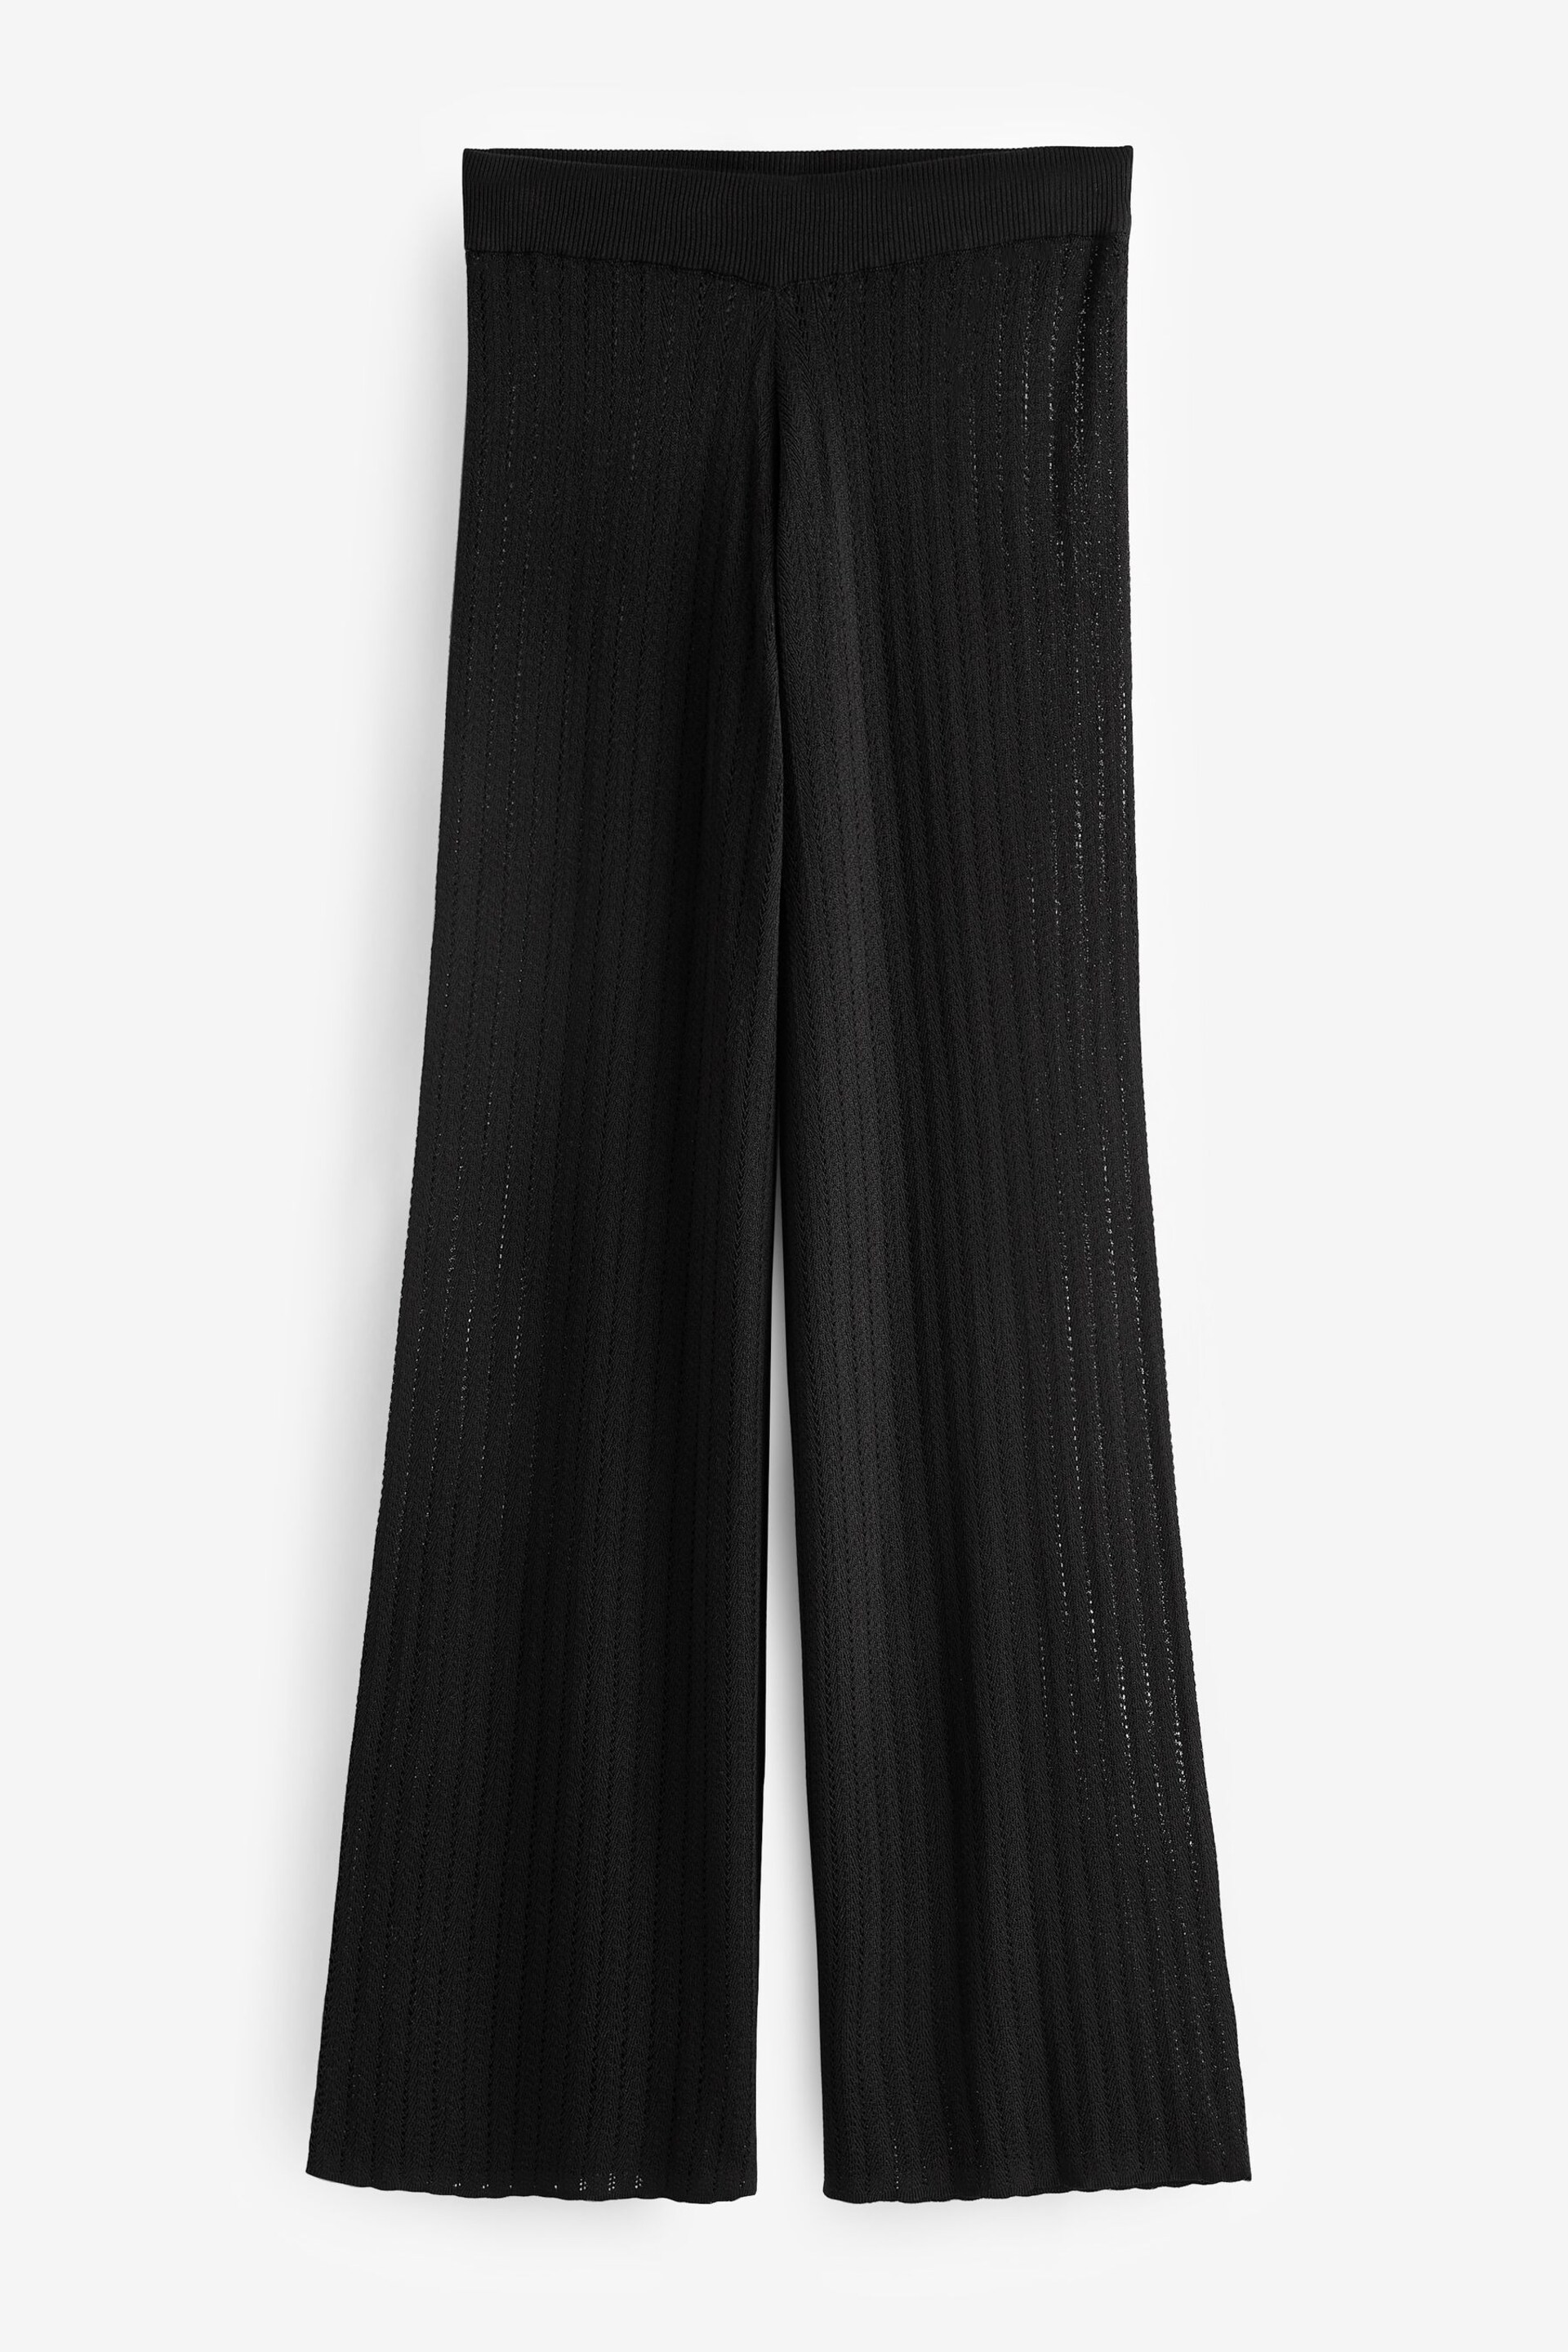 Black Coord Stitch Detail Knitted Beach Trousers - Image 5 of 6